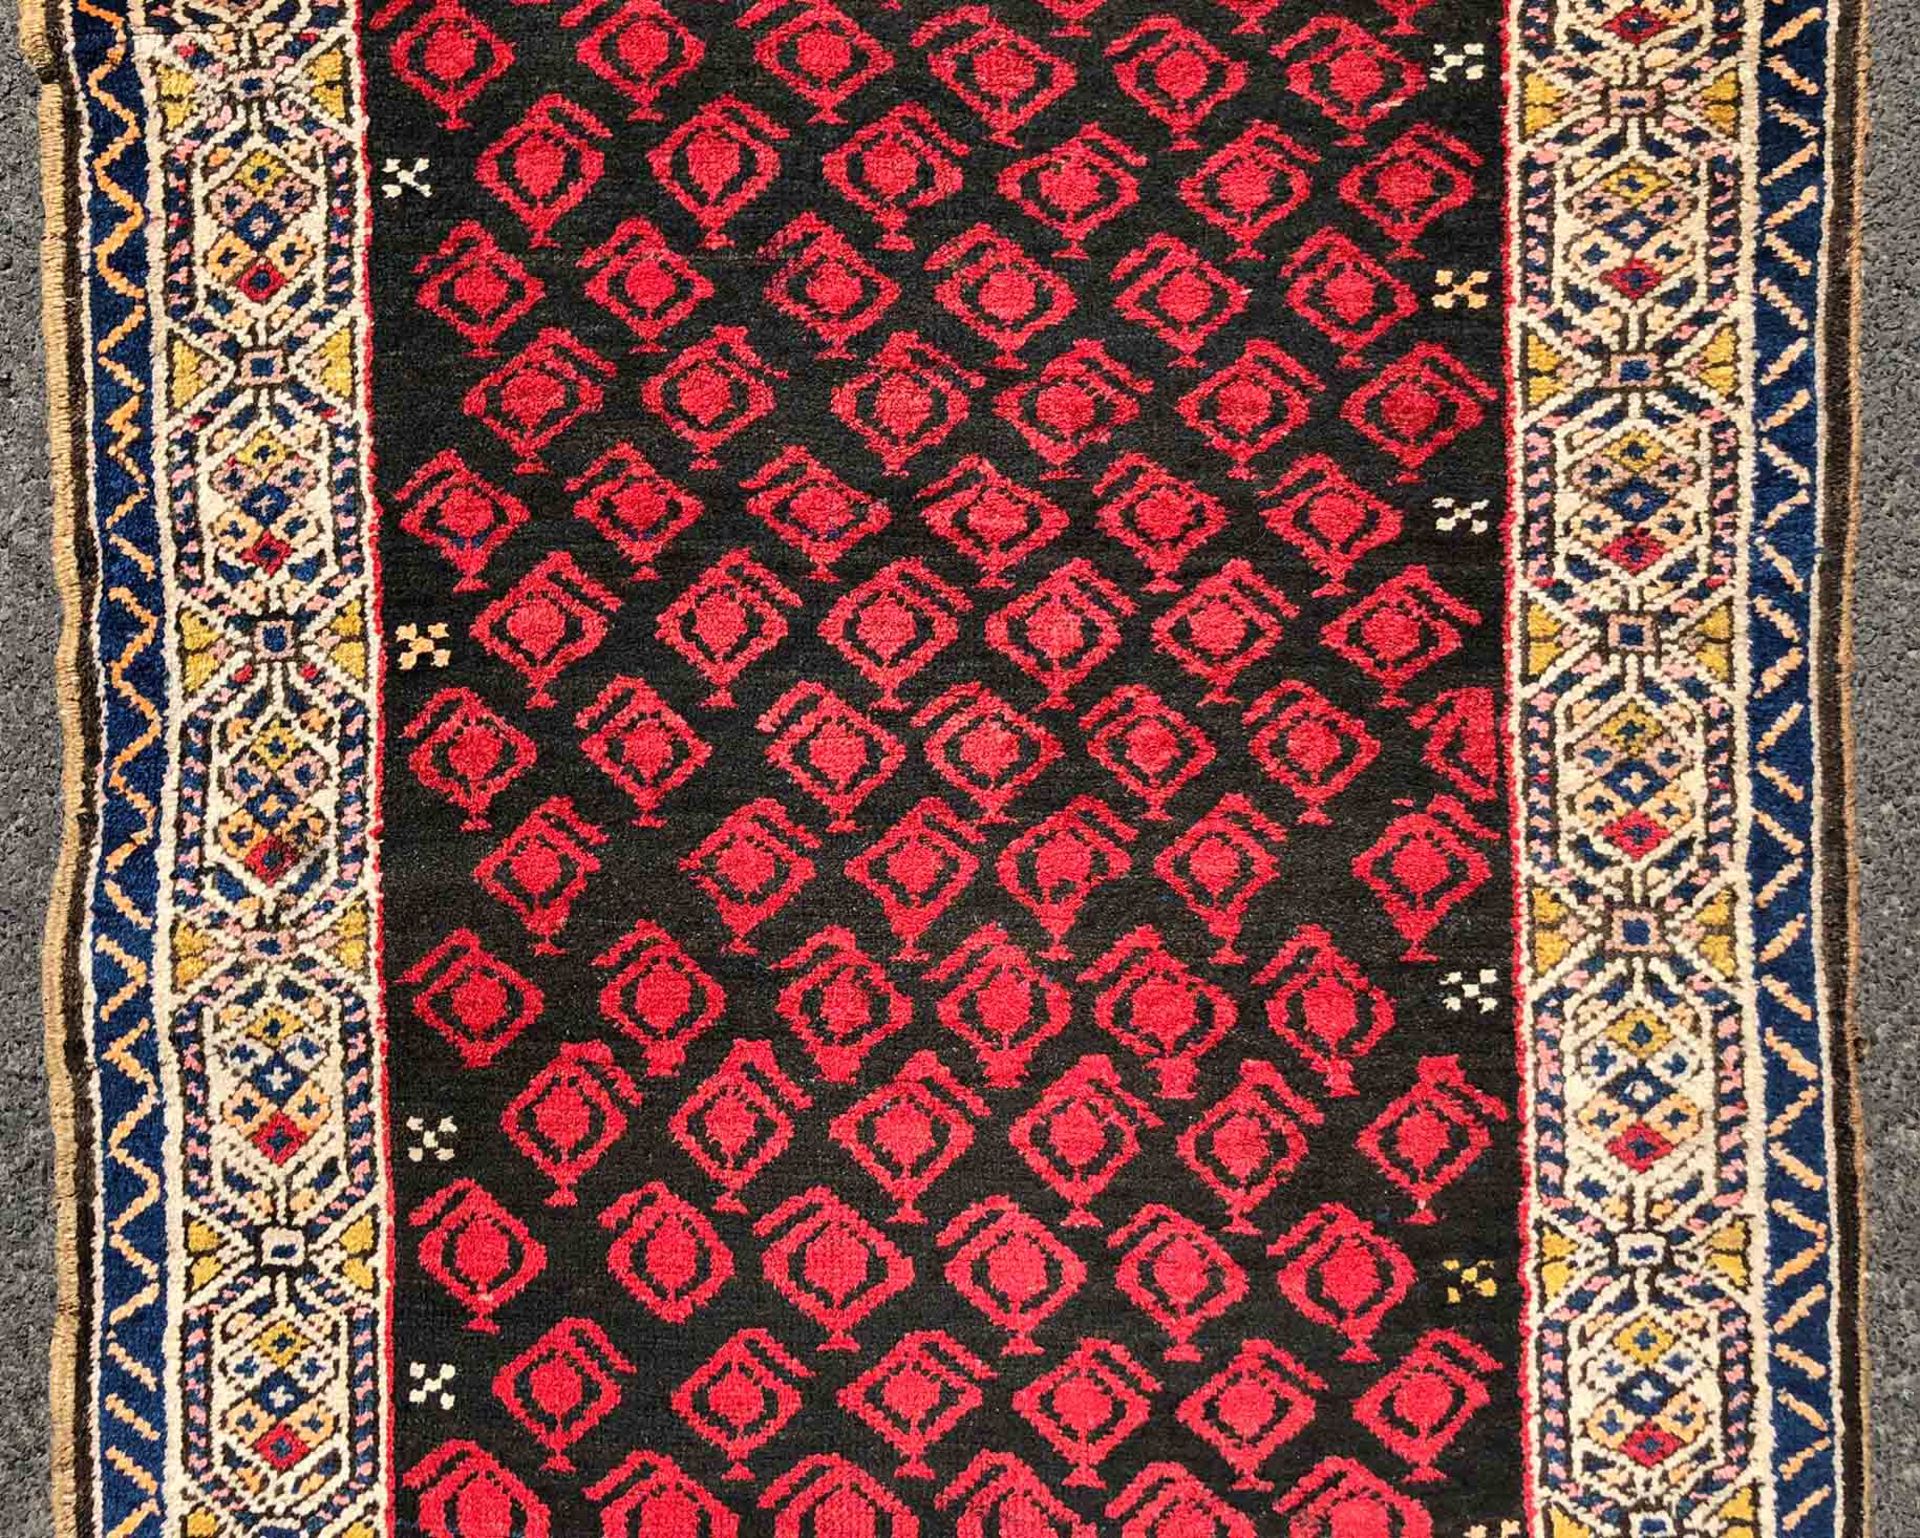 Hamadan Persian carpet. Iran. Antique, around 1910.352 cm x 108 cm. Knotted by hand. Wool on cotton. - Image 3 of 8